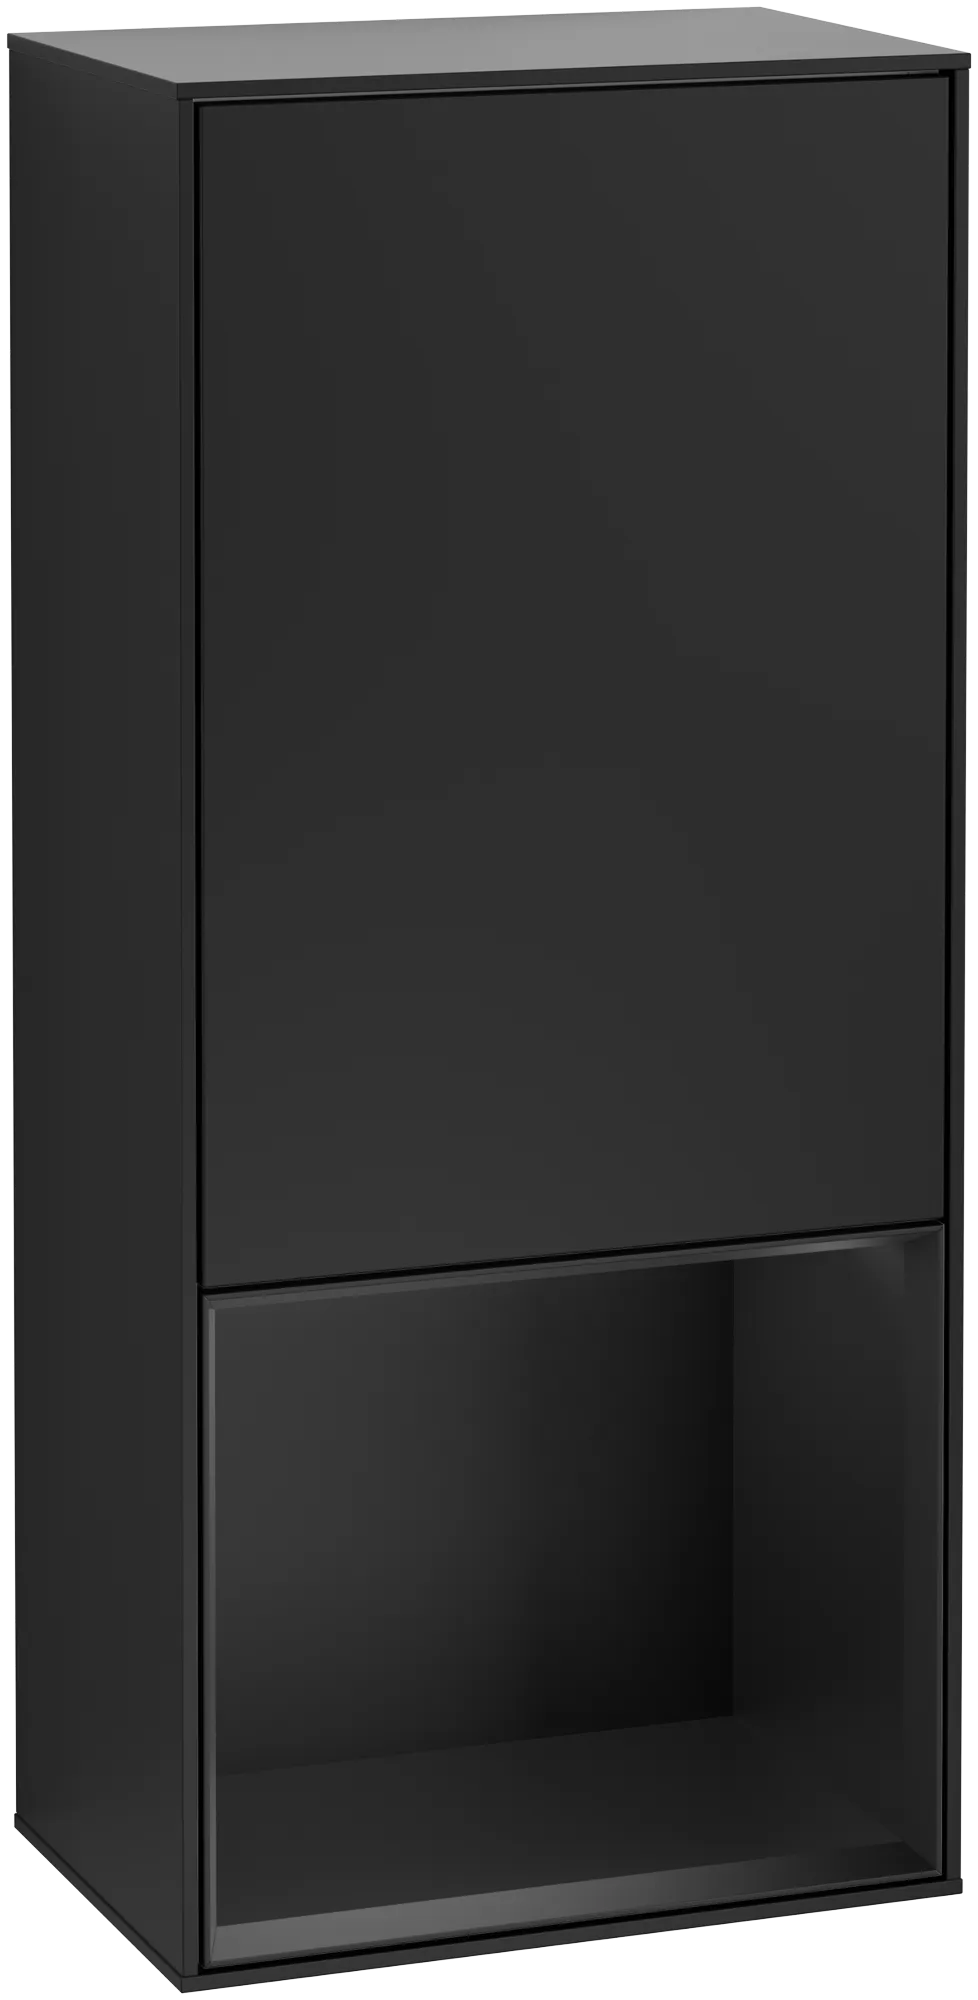 Picture of VILLEROY BOCH Finion Side cabinet, with lighting, 1 door, 418 x 936 x 270 mm, Black Matt Lacquer / Black Matt Lacquer #G550PDPD